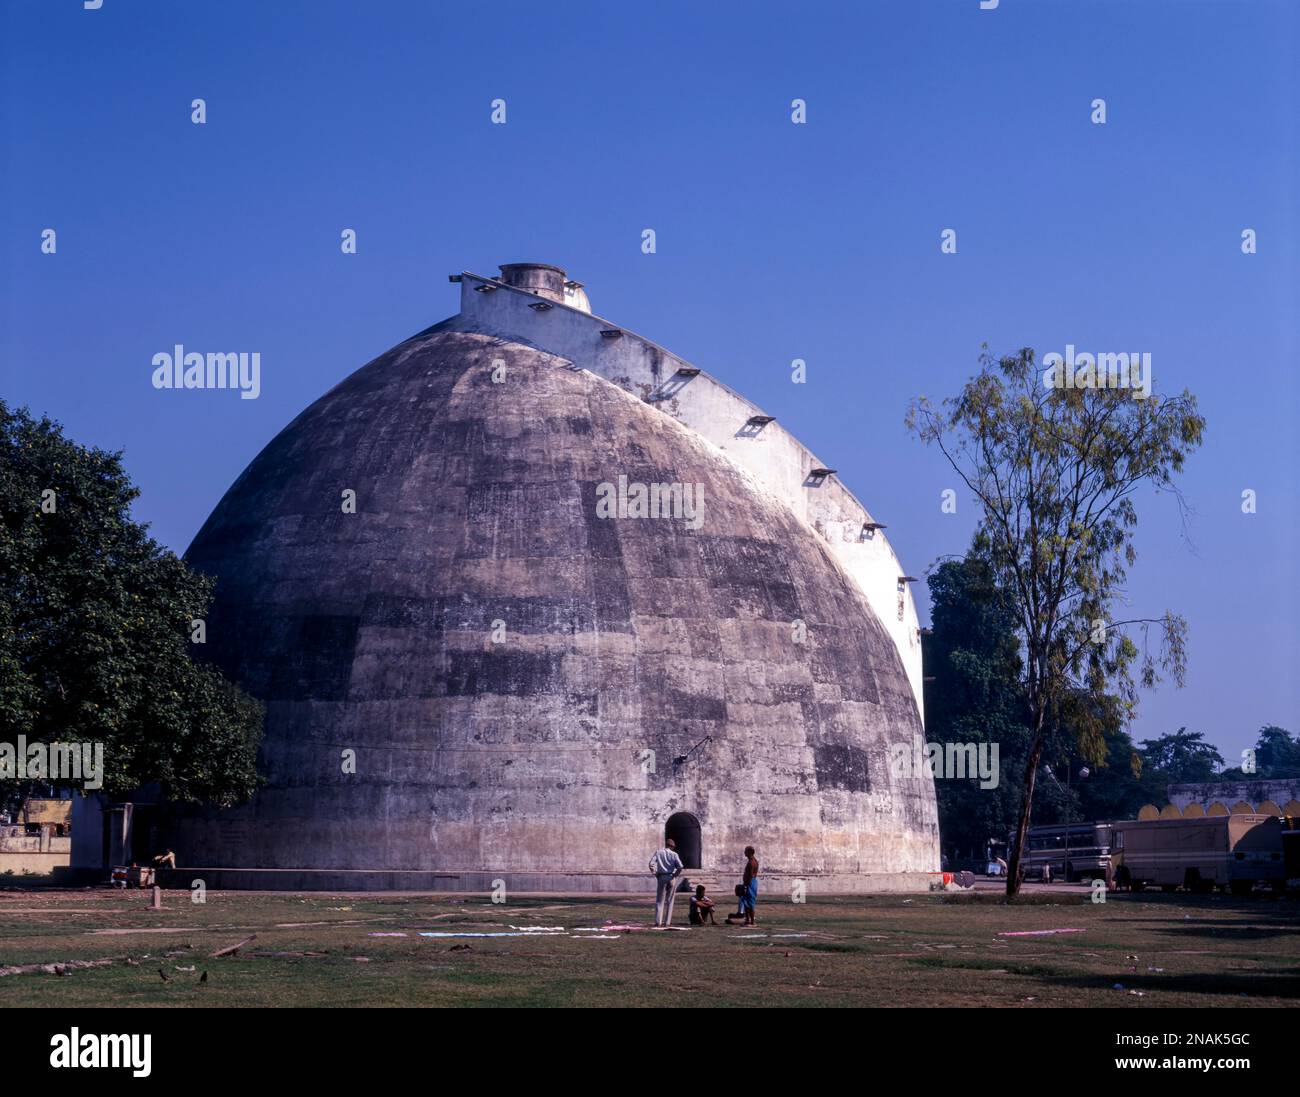 29metre high silo Golghar, is a vasat hemisphere its walls 3-6 metres thick at the base. Built in 1786 to serve as a Granary for British Armies. Stock Photo